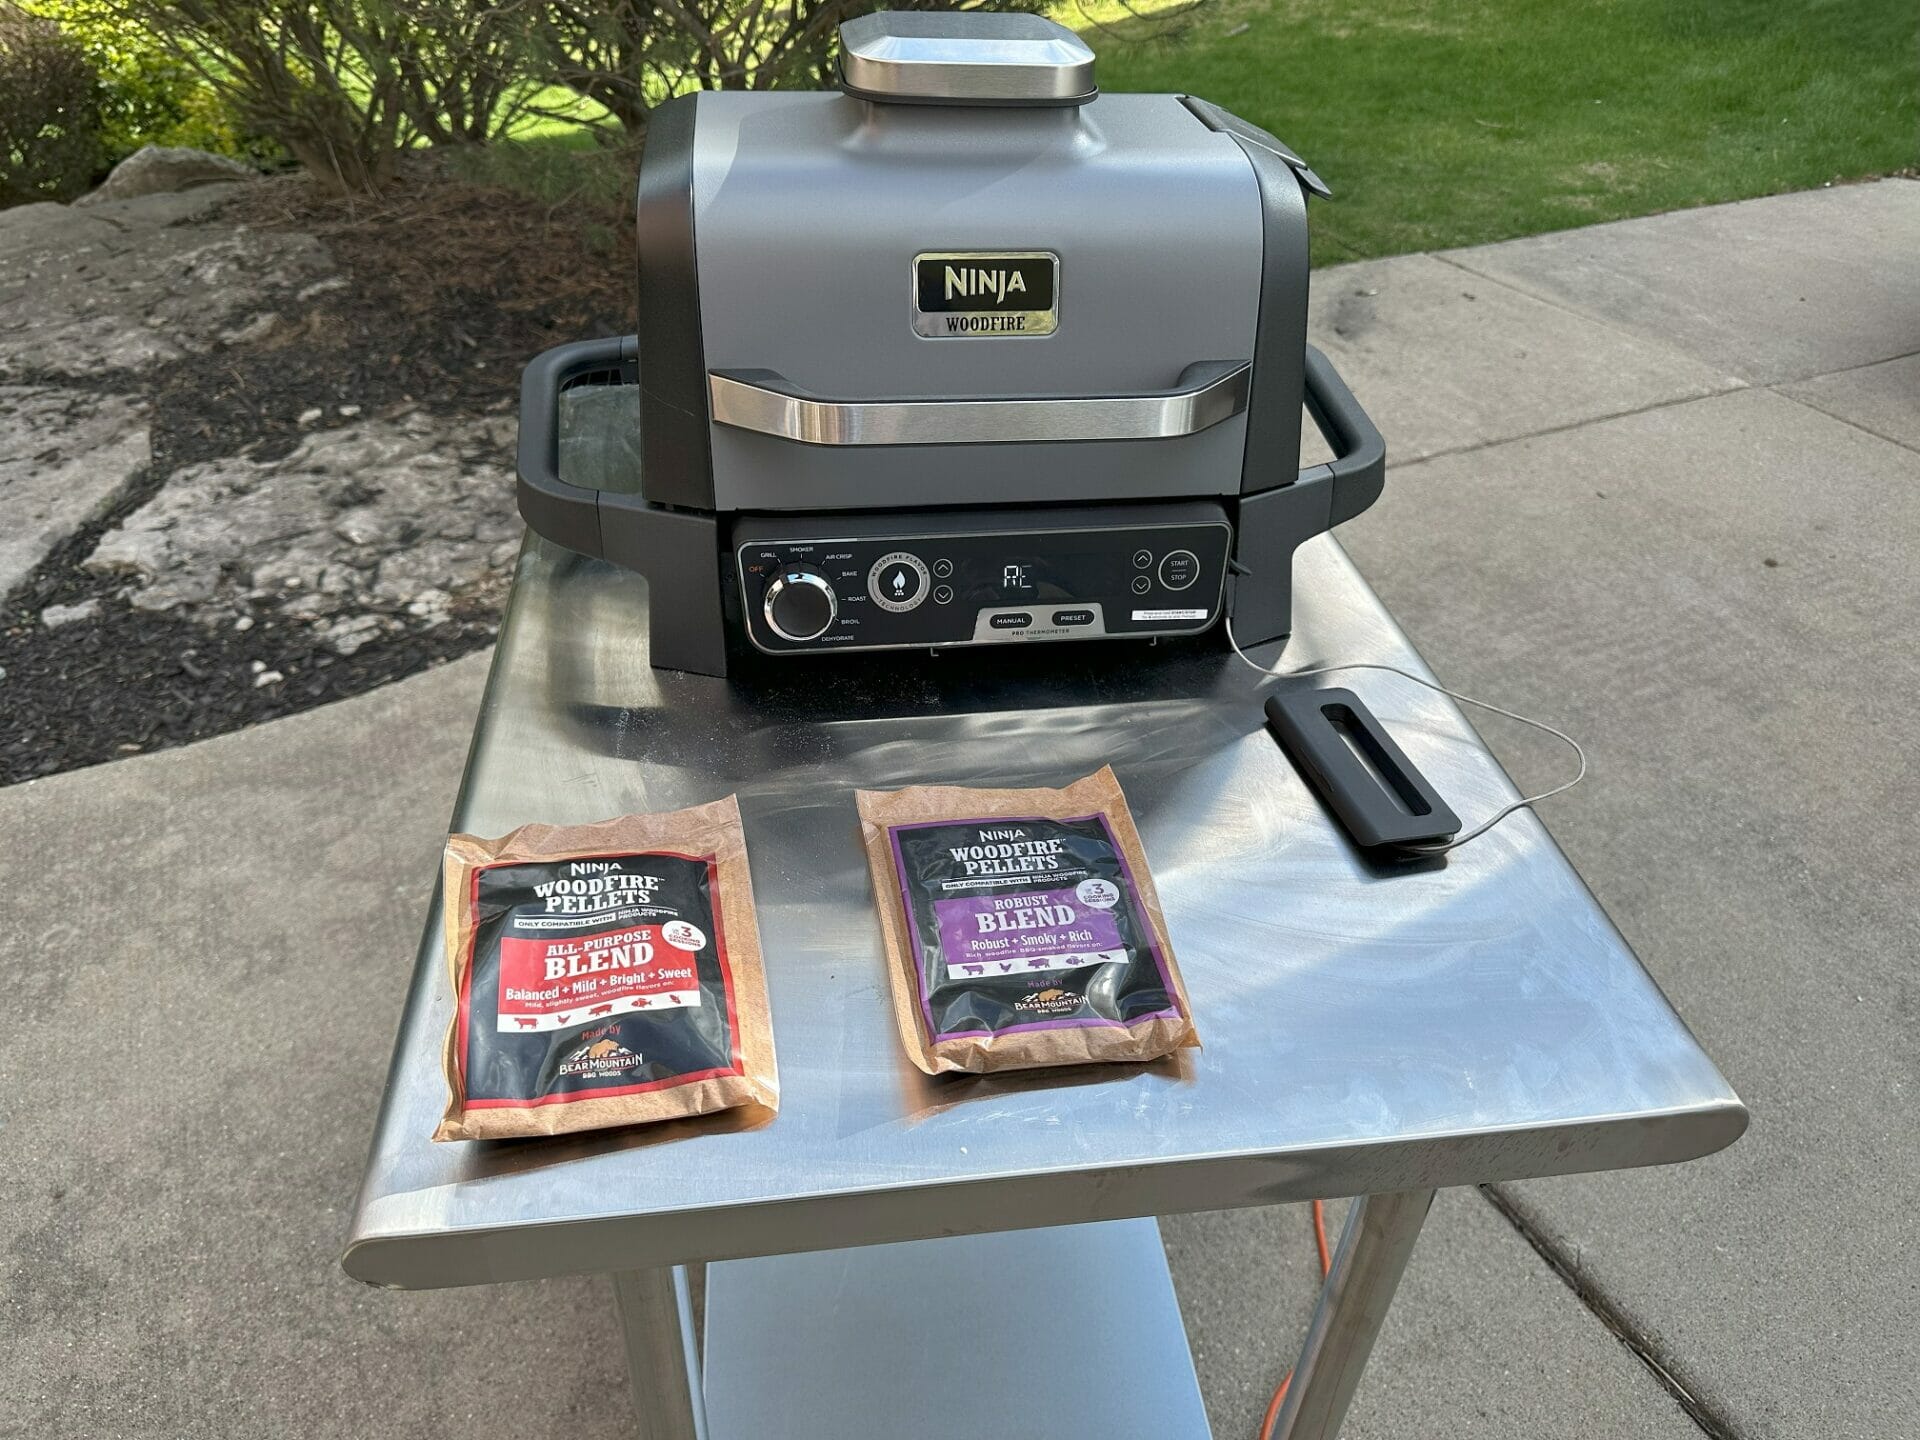 Char-Broil Releases a Universal Pizza Oven Grill Accessory - CookOut News